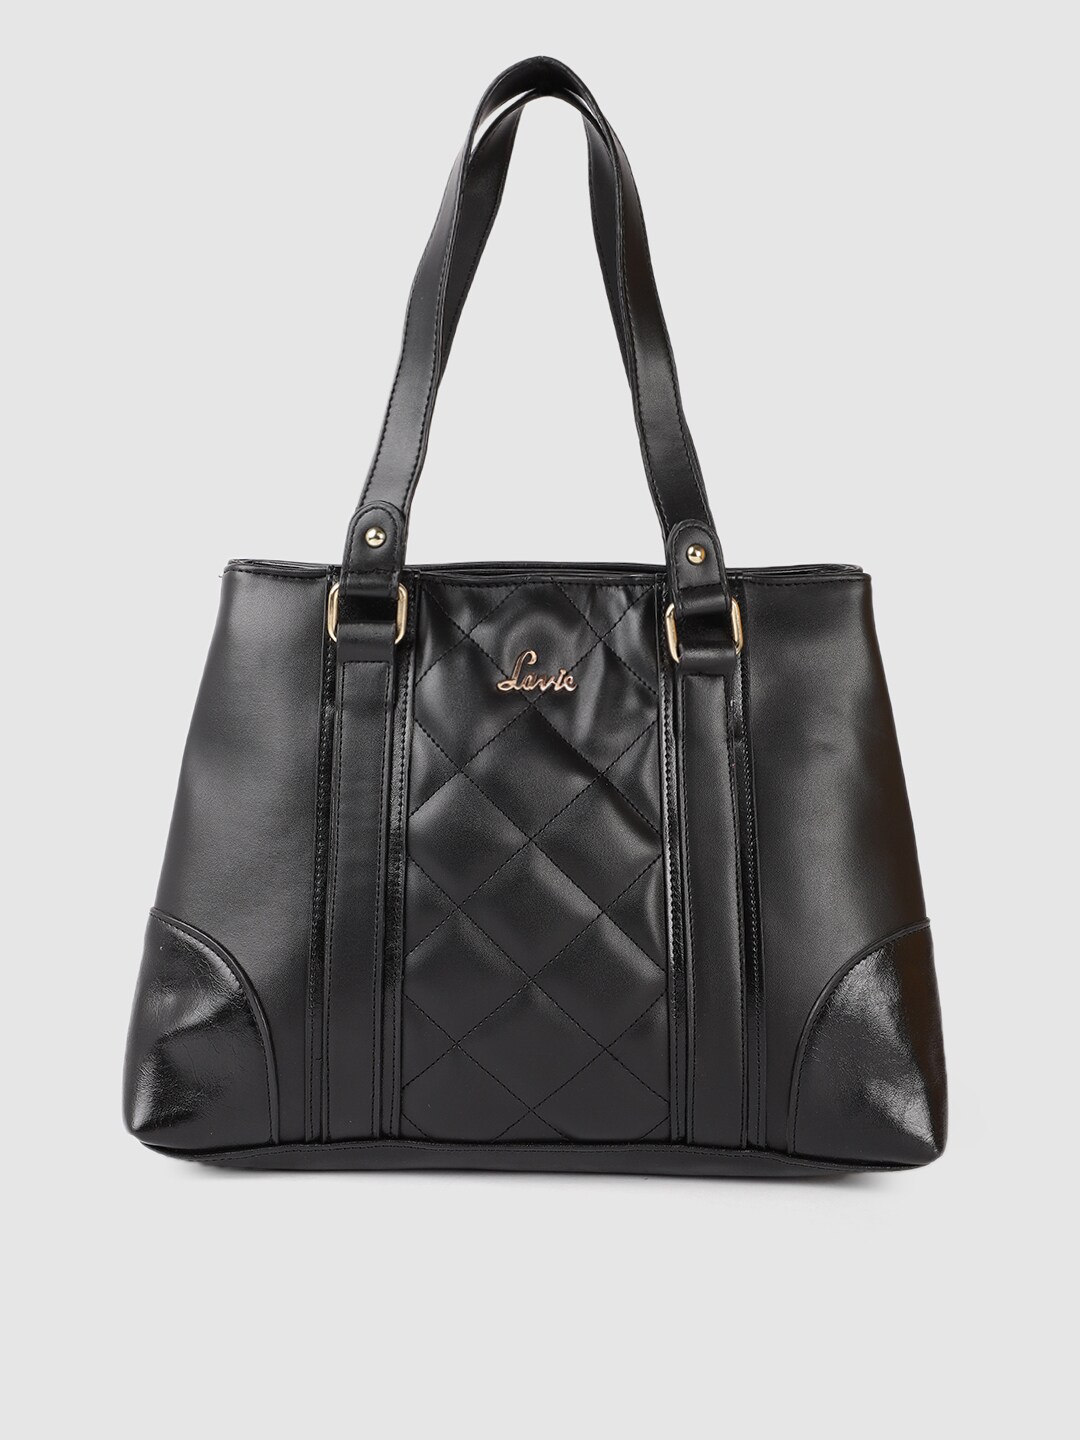 Lavie Black Structured Shoulder Bag with Quilted Price in India